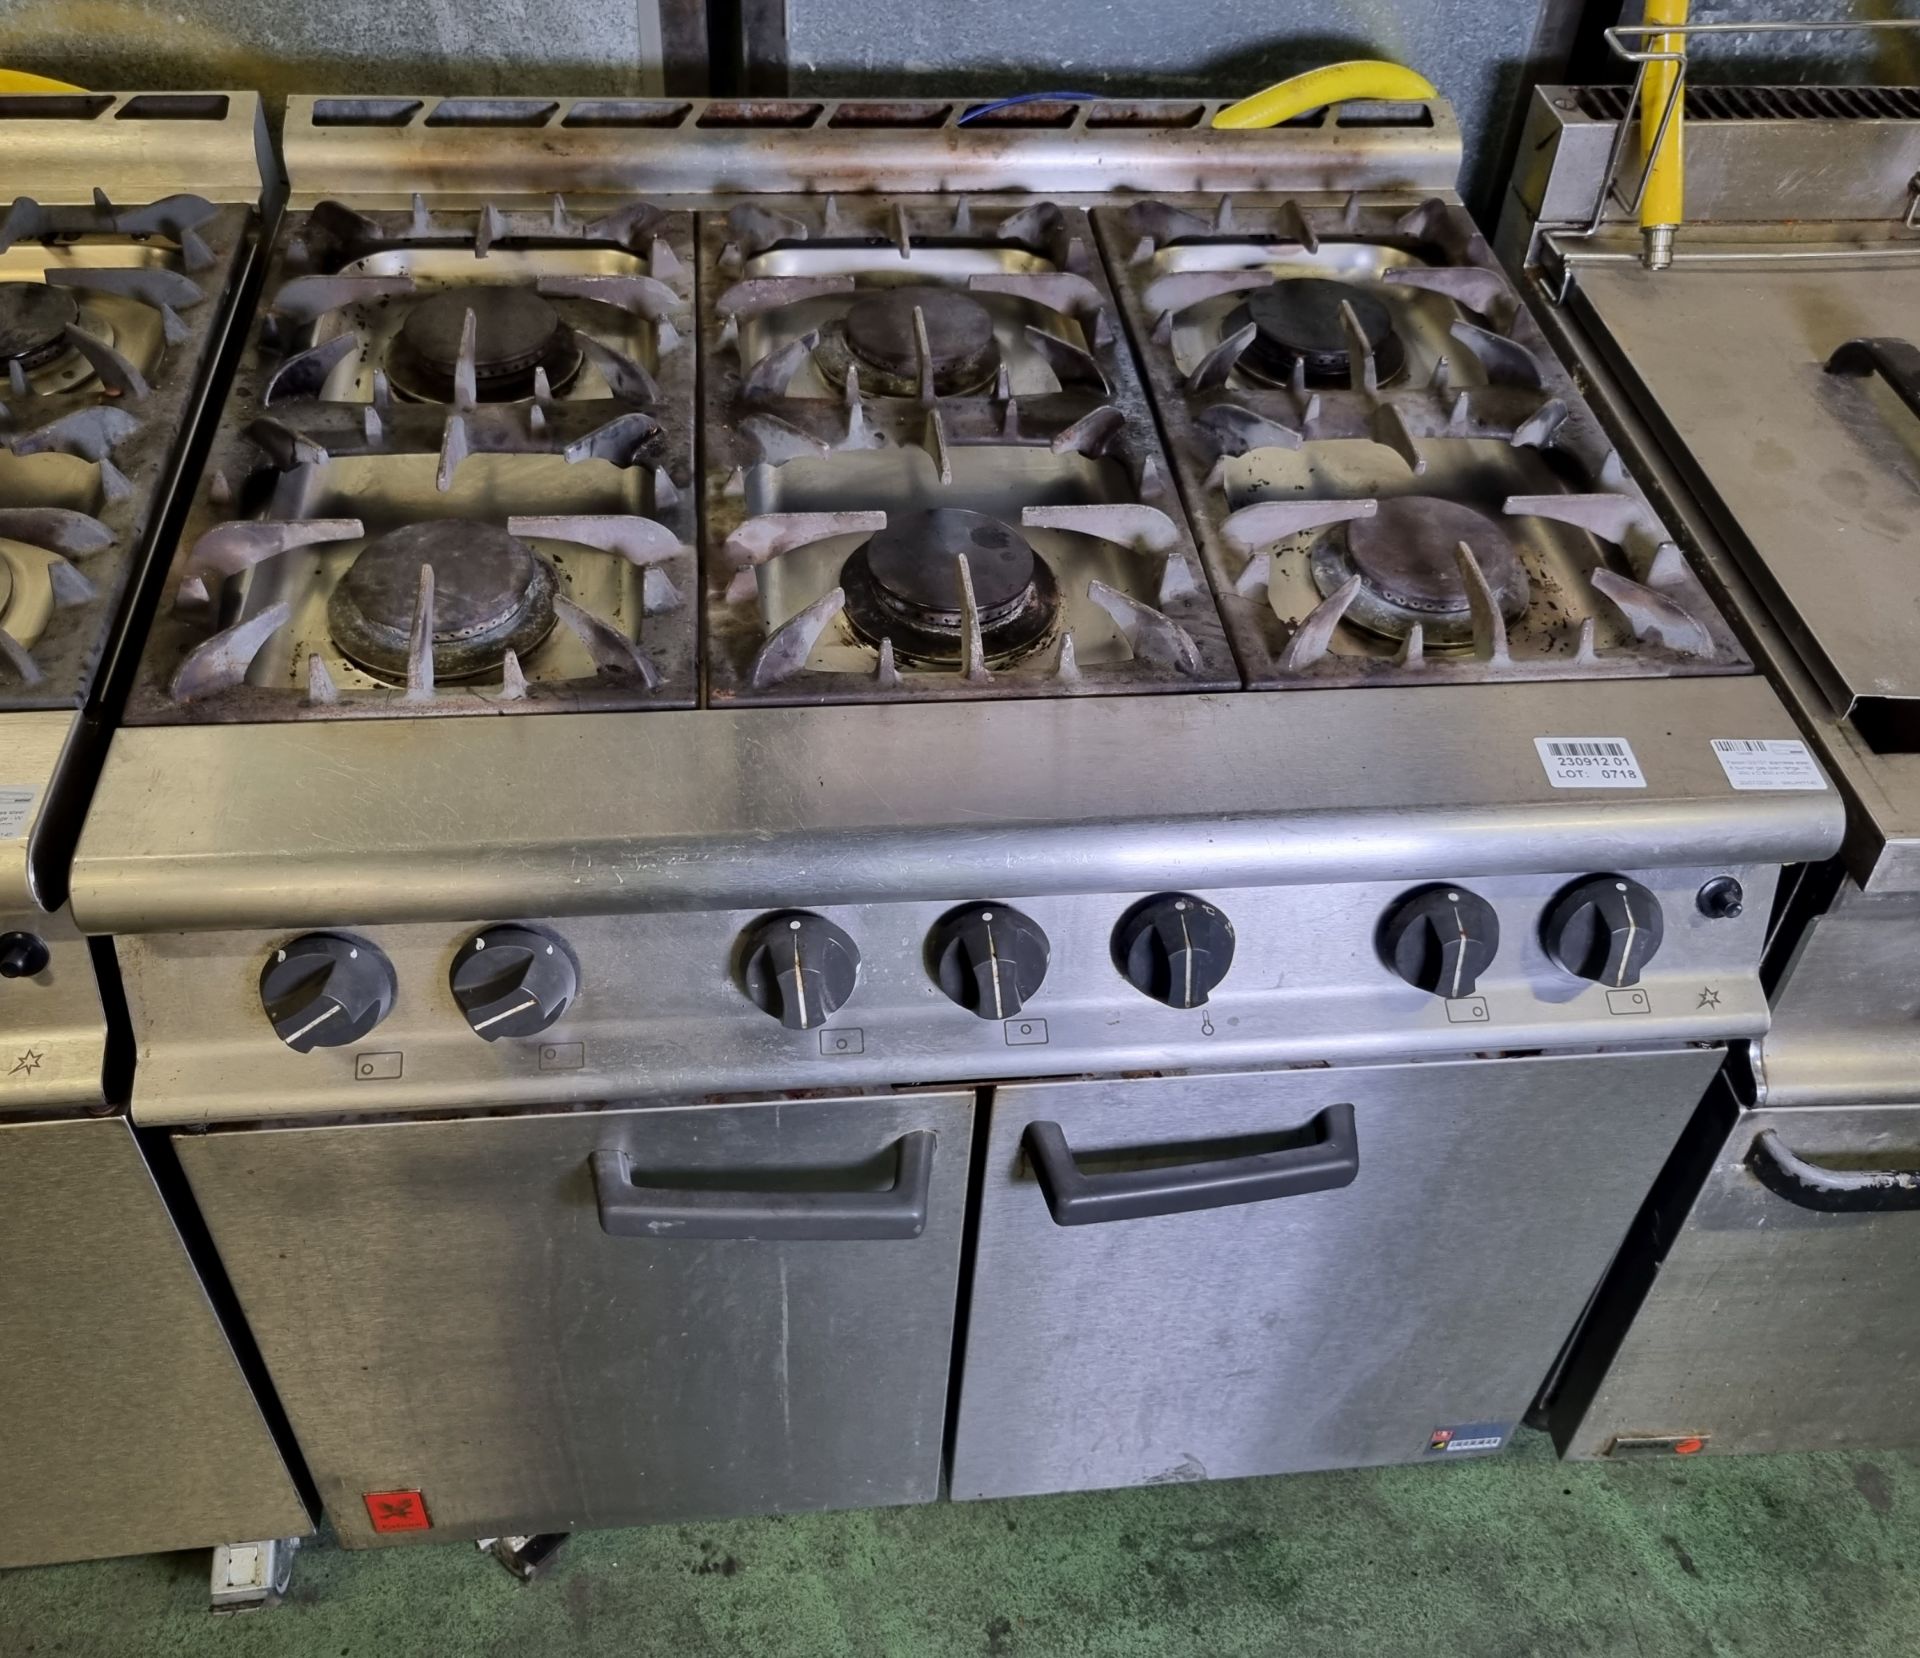 Falcon G3101 stainless steel 6 burner gas oven range - W 900 x D 800 x H 940mm - Image 2 of 3